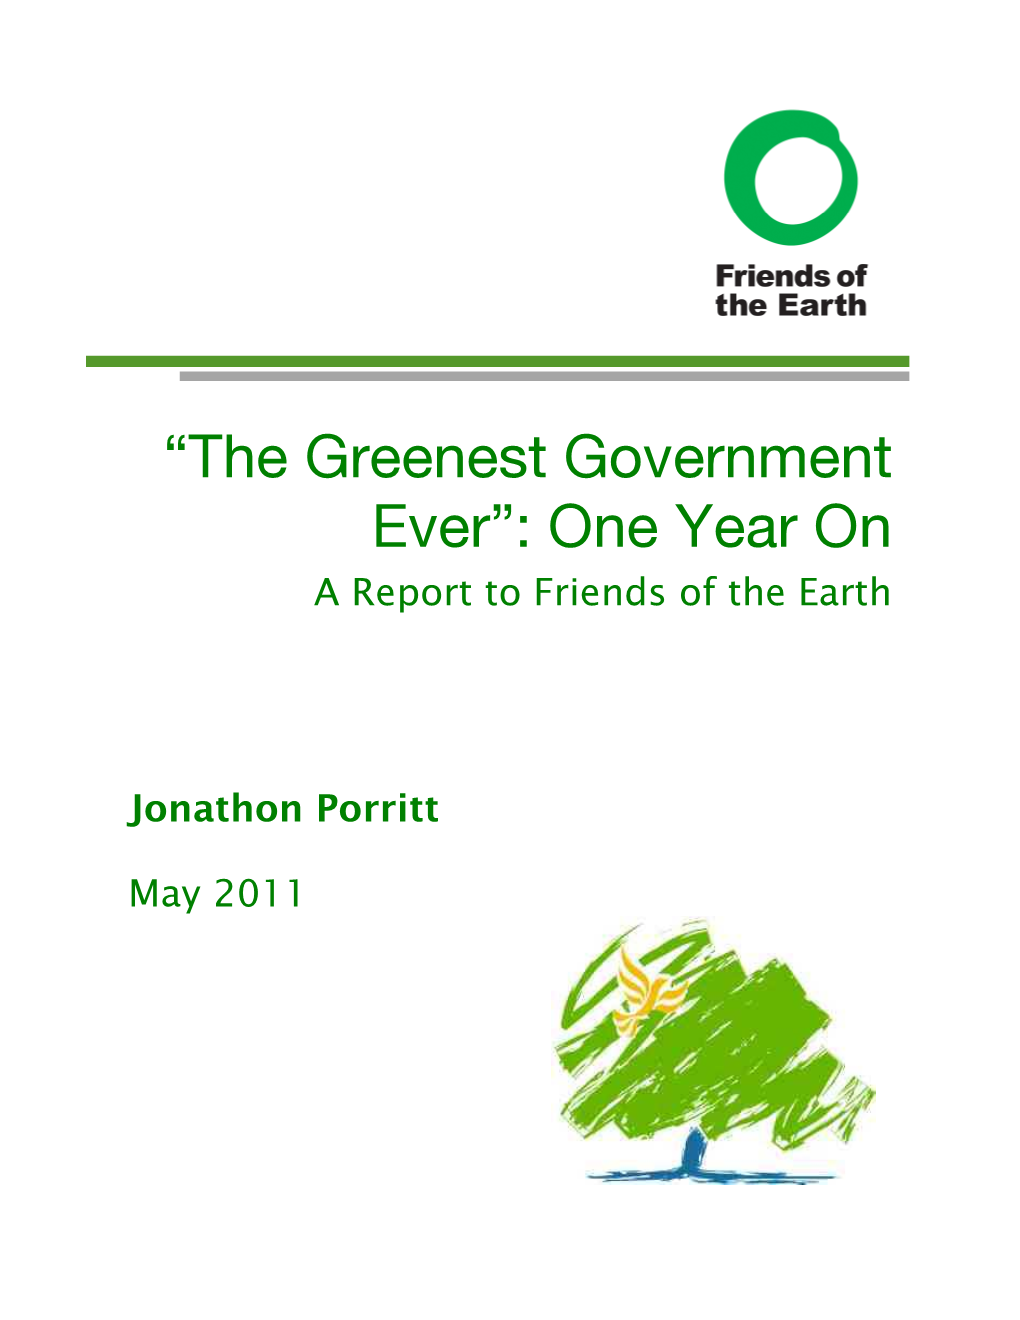 The Greenest Government Ever”: One Year on a Report to Friends of the Earth